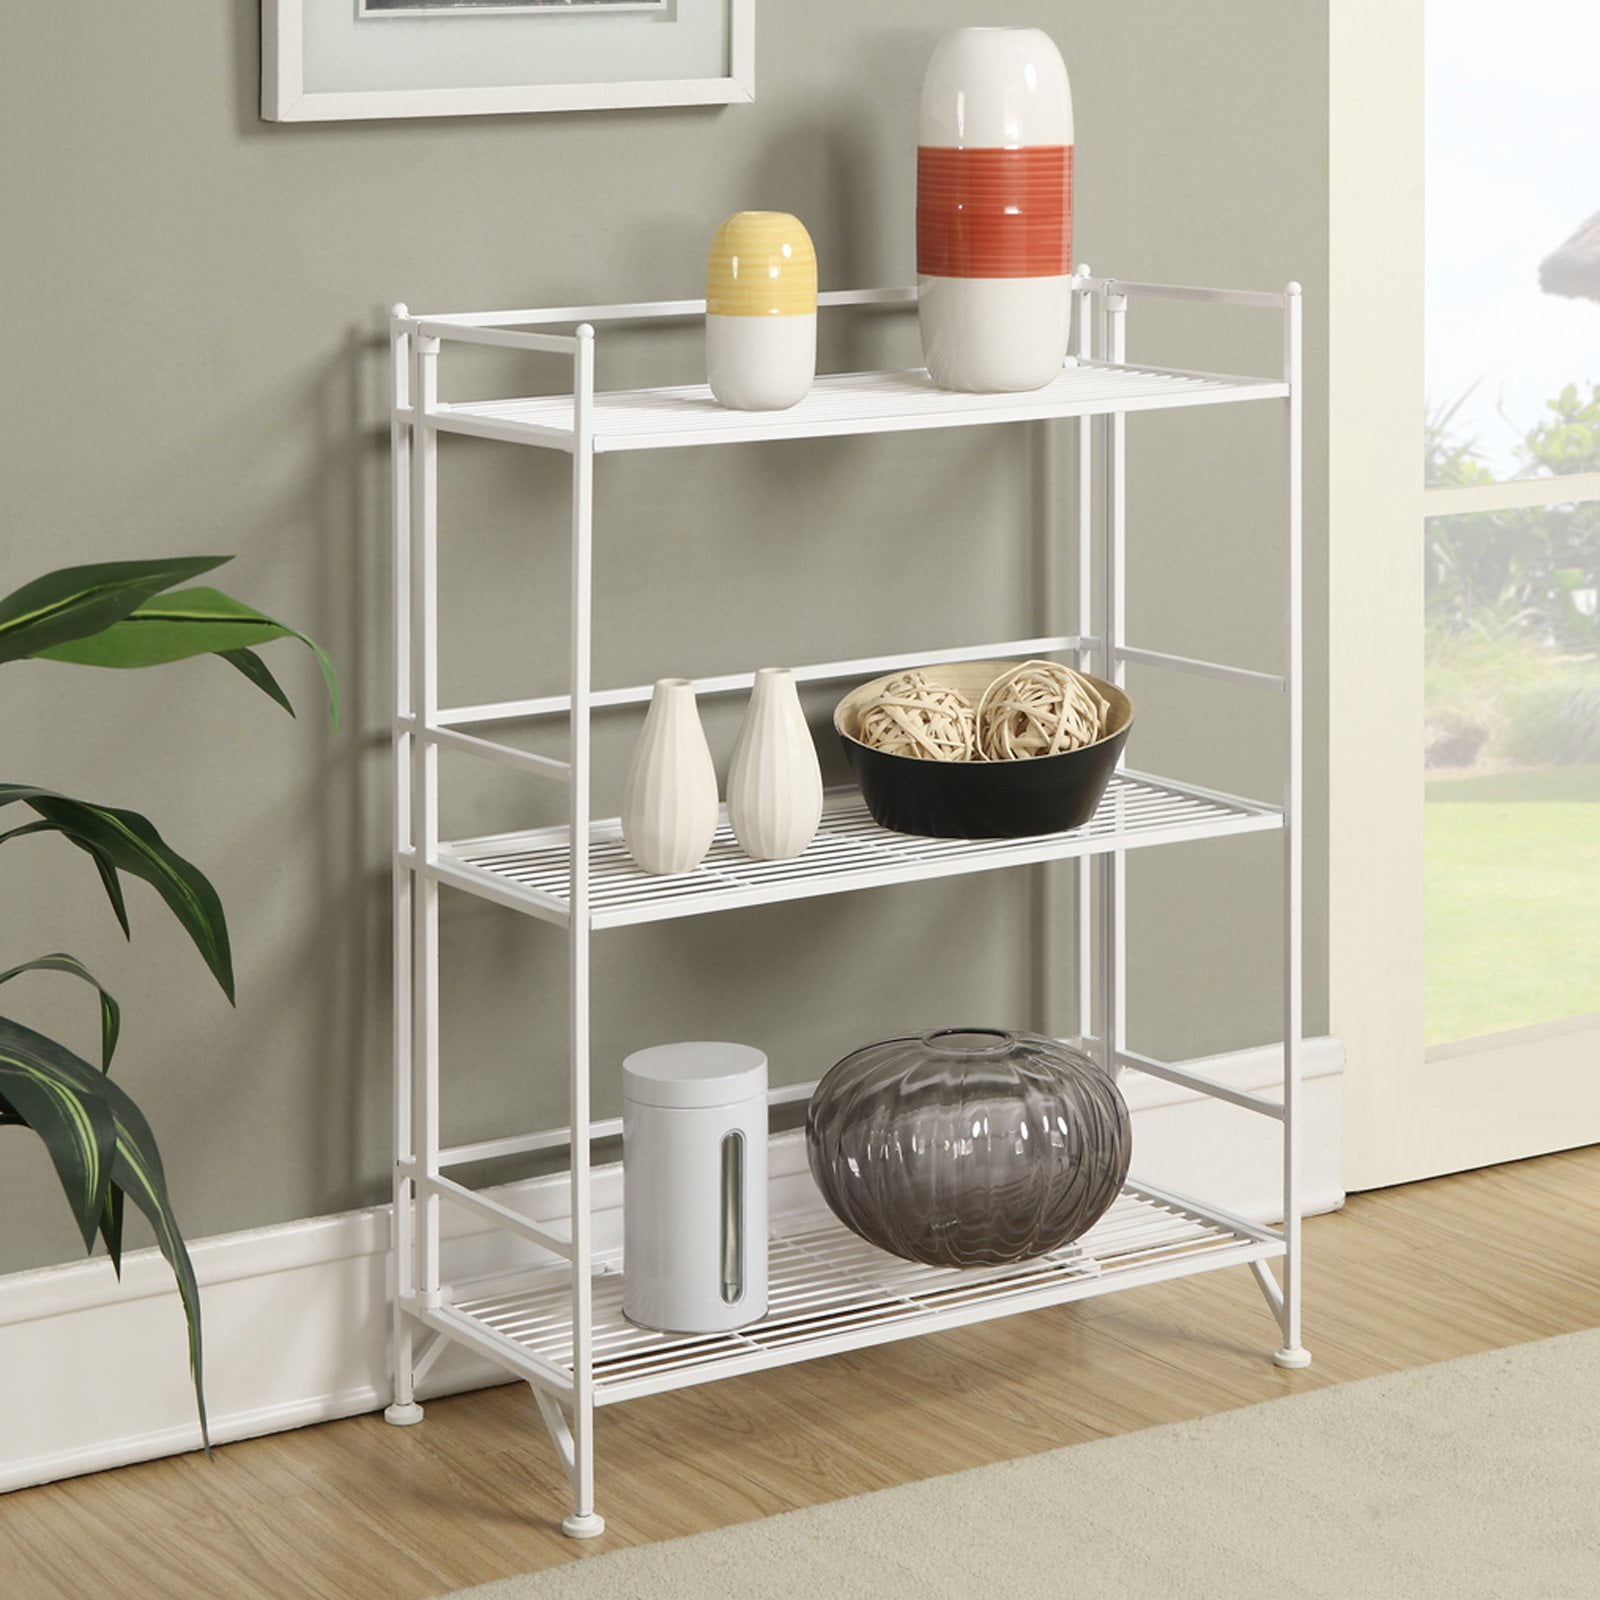 Convenience Concepts Xtra Storage 3 Tier Wide Folding Metal Shelf, White - image 1 of 7